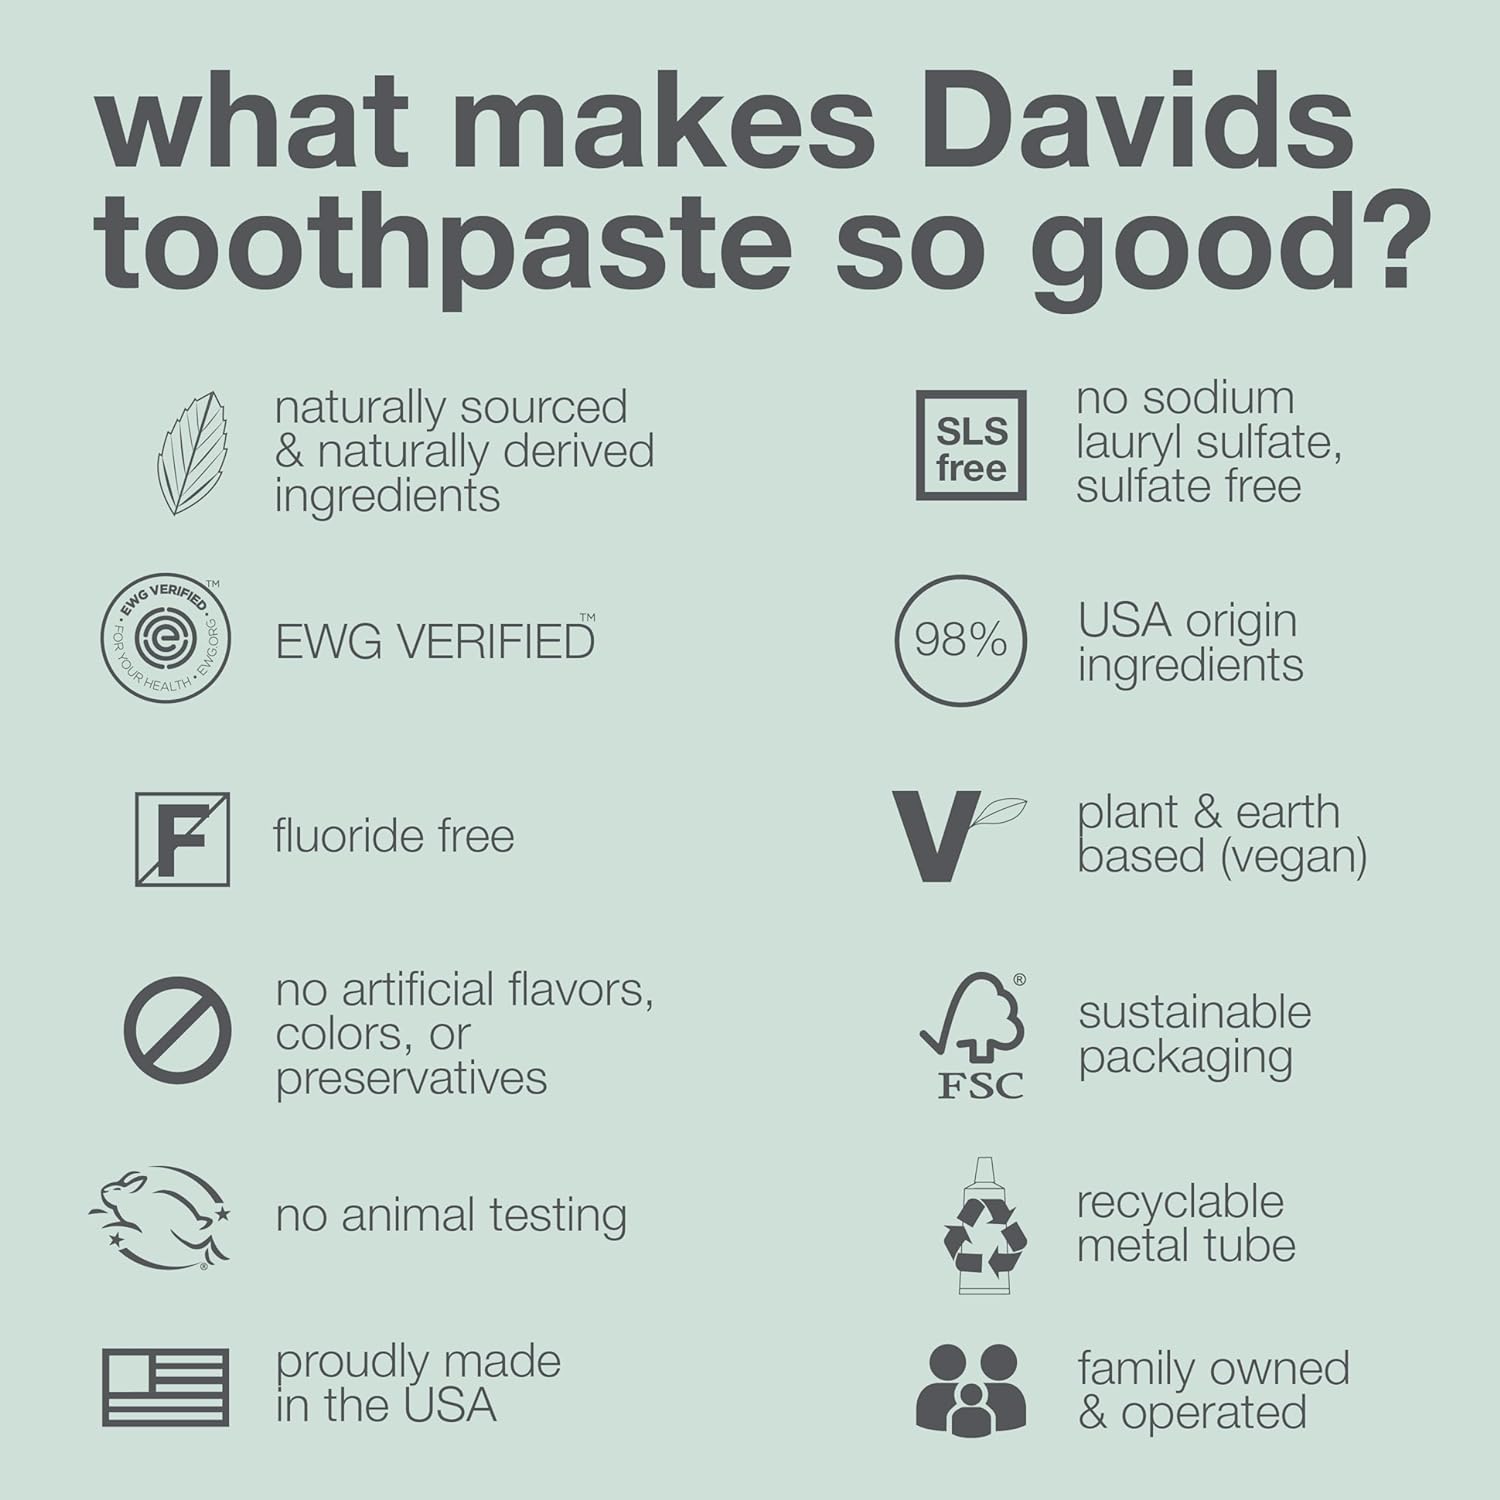 Davids Natural Toothpaste for Teeth Whitening, Peppermint, Antiplaque, Fluoride Free, SLS Free, EWG Verified, Toothpaste Squeezer Included, Recyclable Metal Tube, 5.25oz : Health & Household